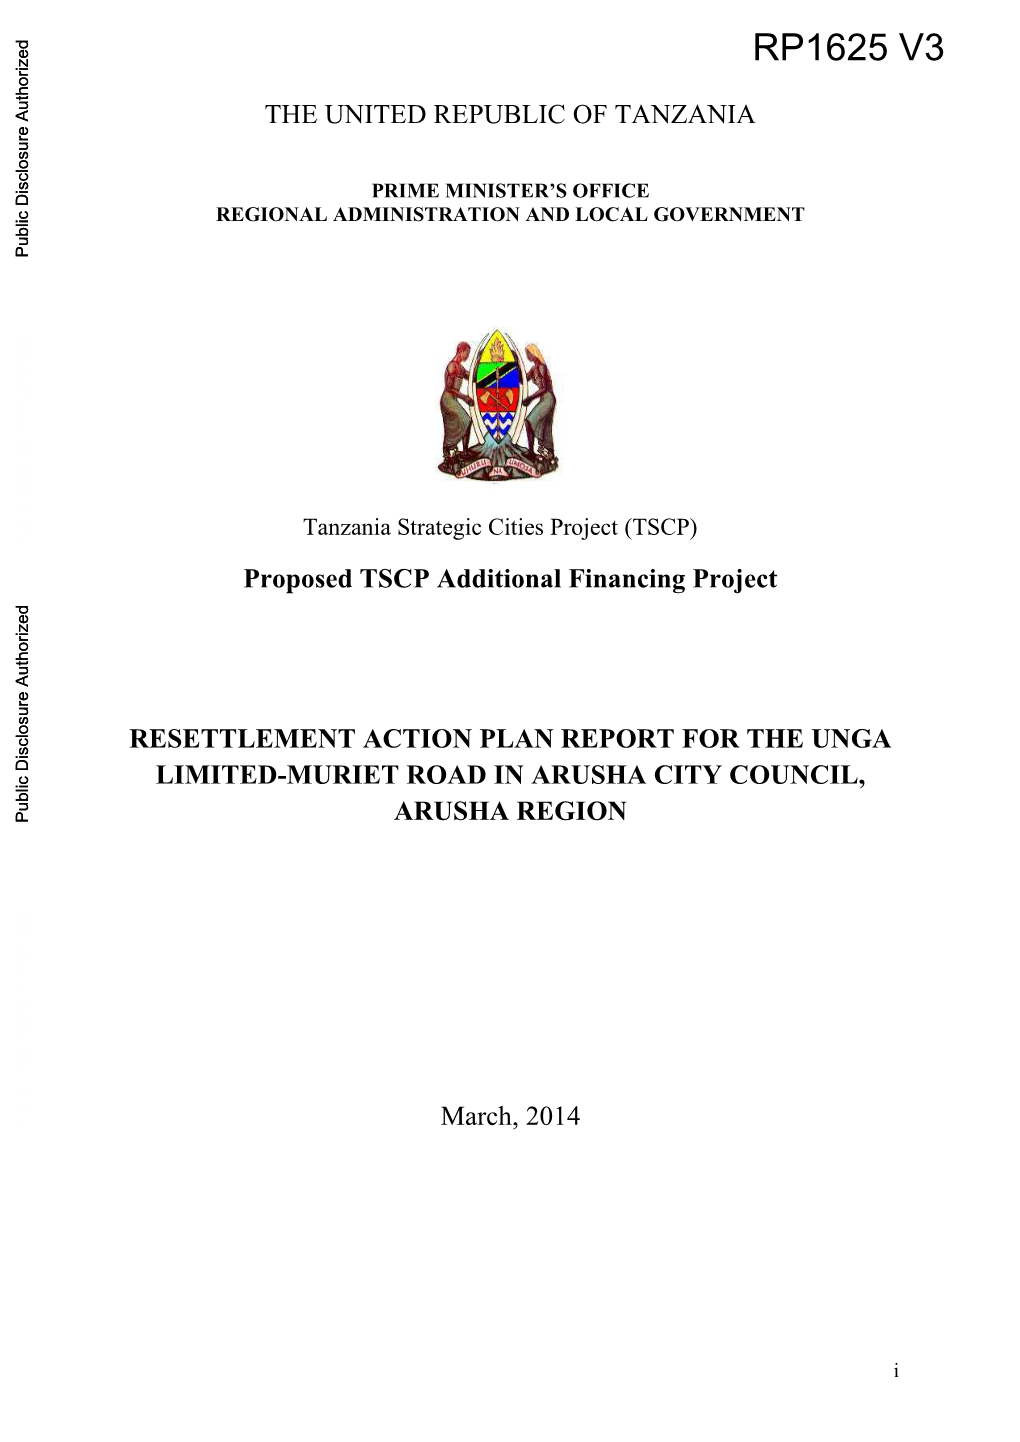 Proposed TSCP Additional Financing Project RESETTLEMENT ACTION PLAN REPORT